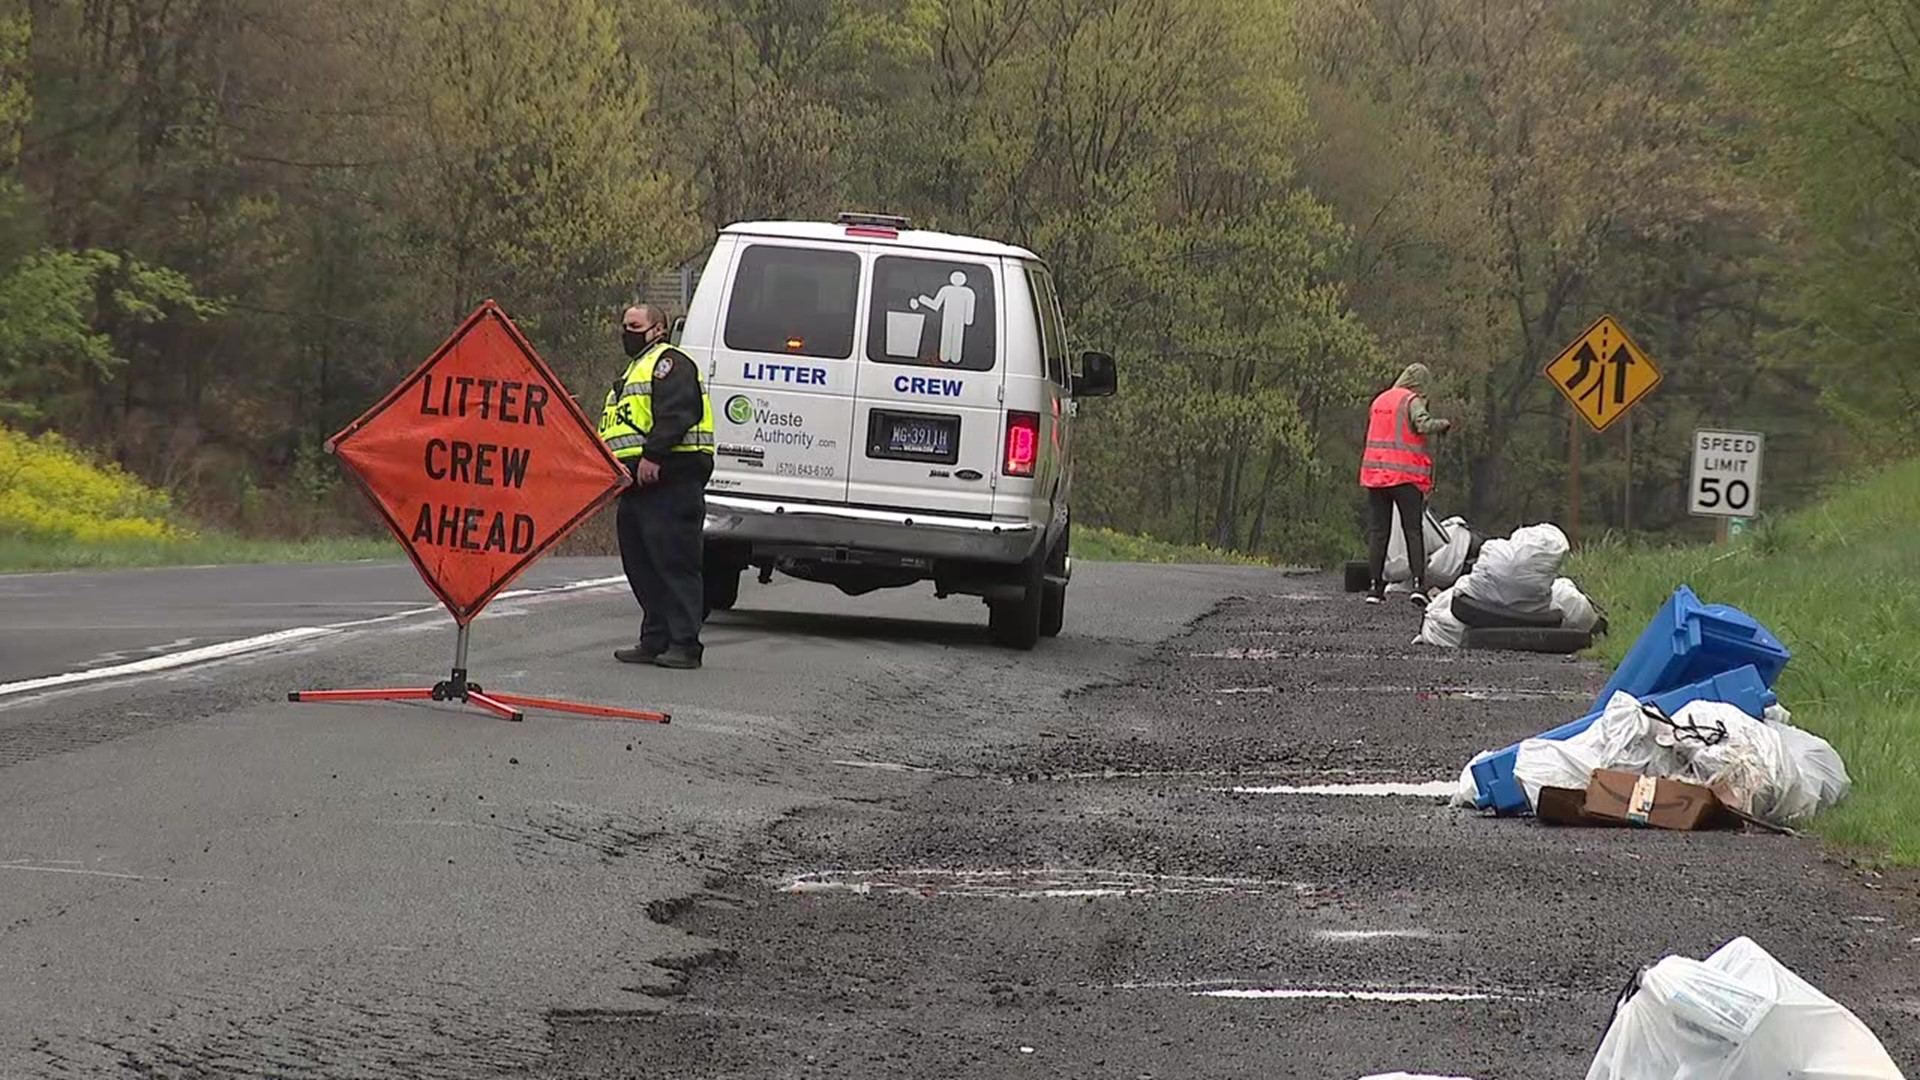 A program in the Poconos has been helping people back on their feet in many ways. In this special report, see how a cleanup program is giving people a fresh start.